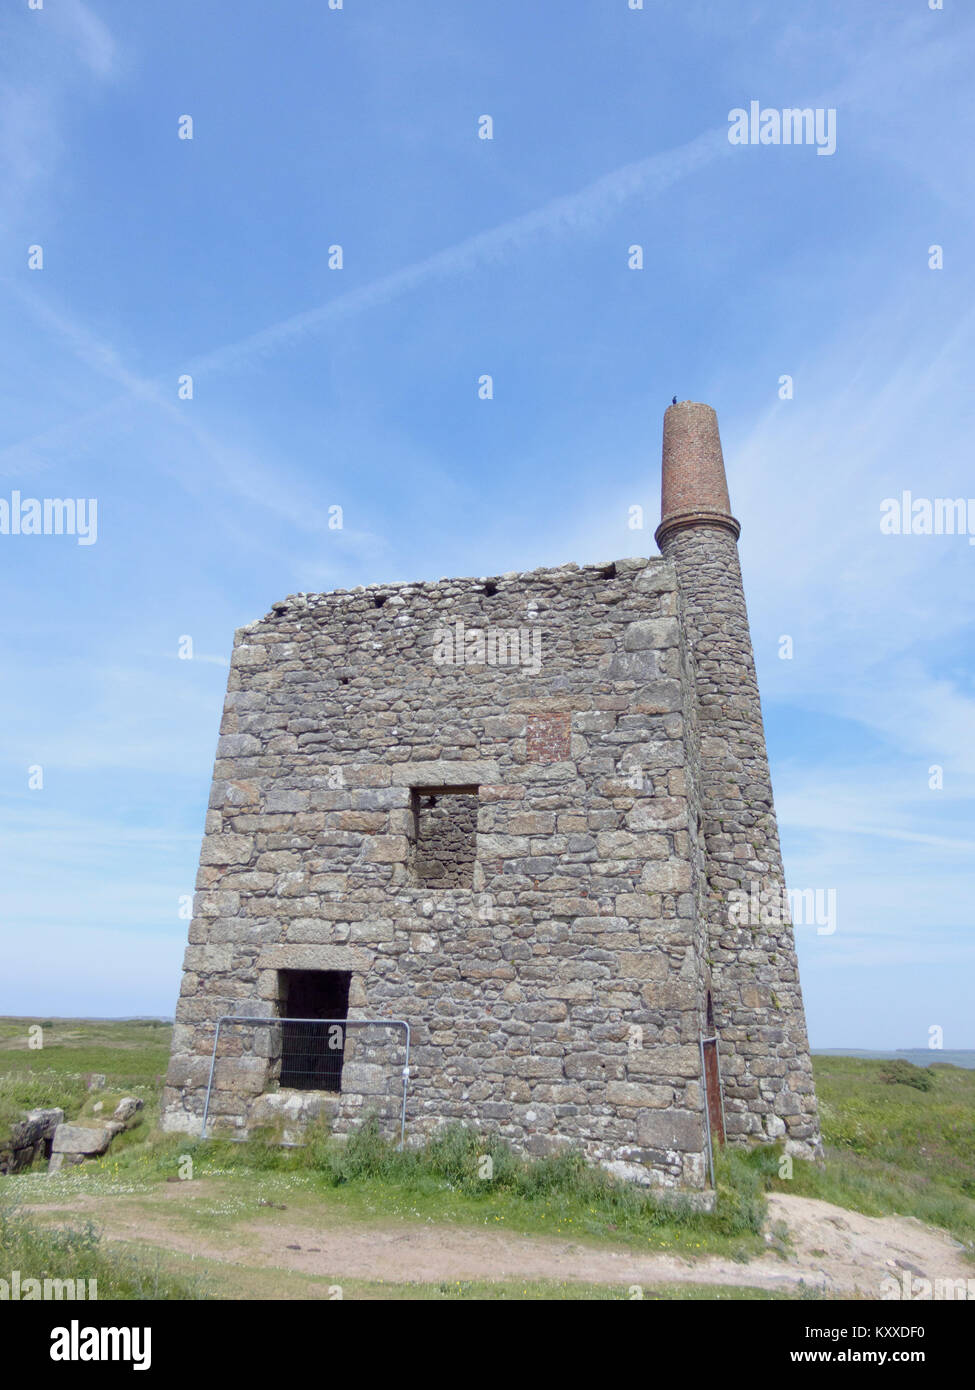 Disused Greenburrow Engine House, Ding Dong Tin Mine, Penwith Peninsula, Cornwall, England, UK in June Stock Photo